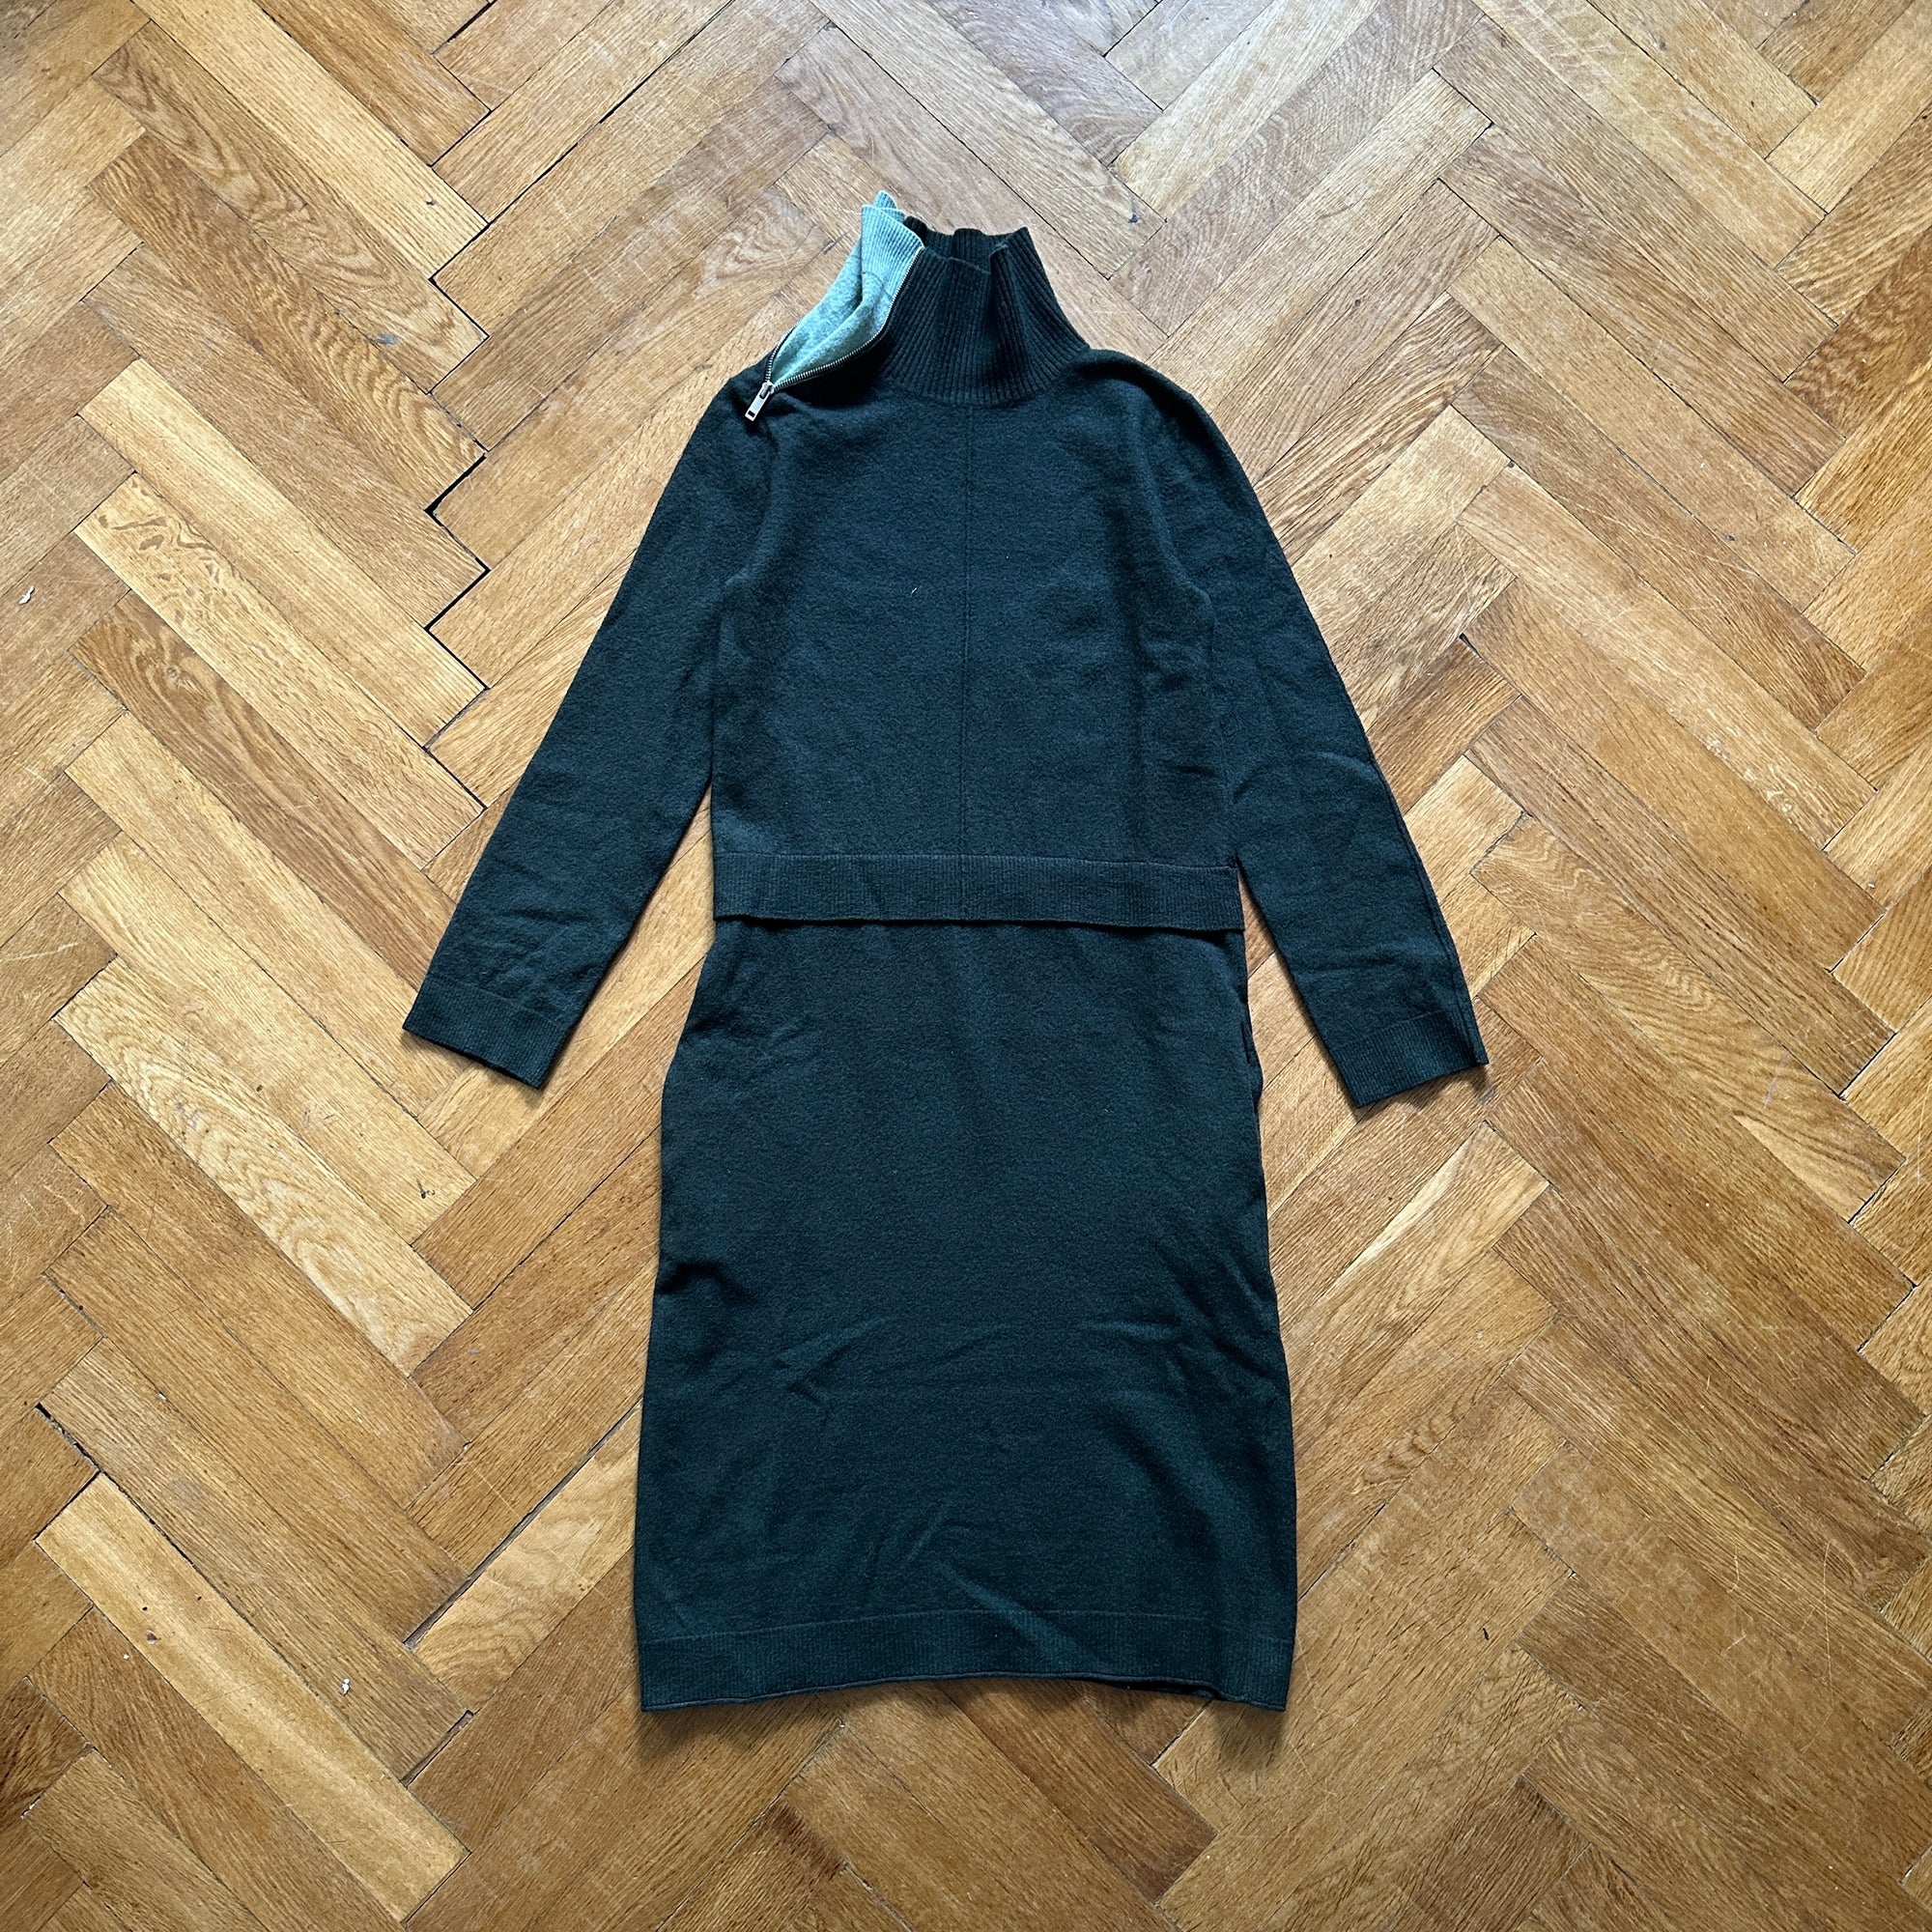 Céline by Phoebe Philo Zipped Contrast Collar Ribbed Wool Dress